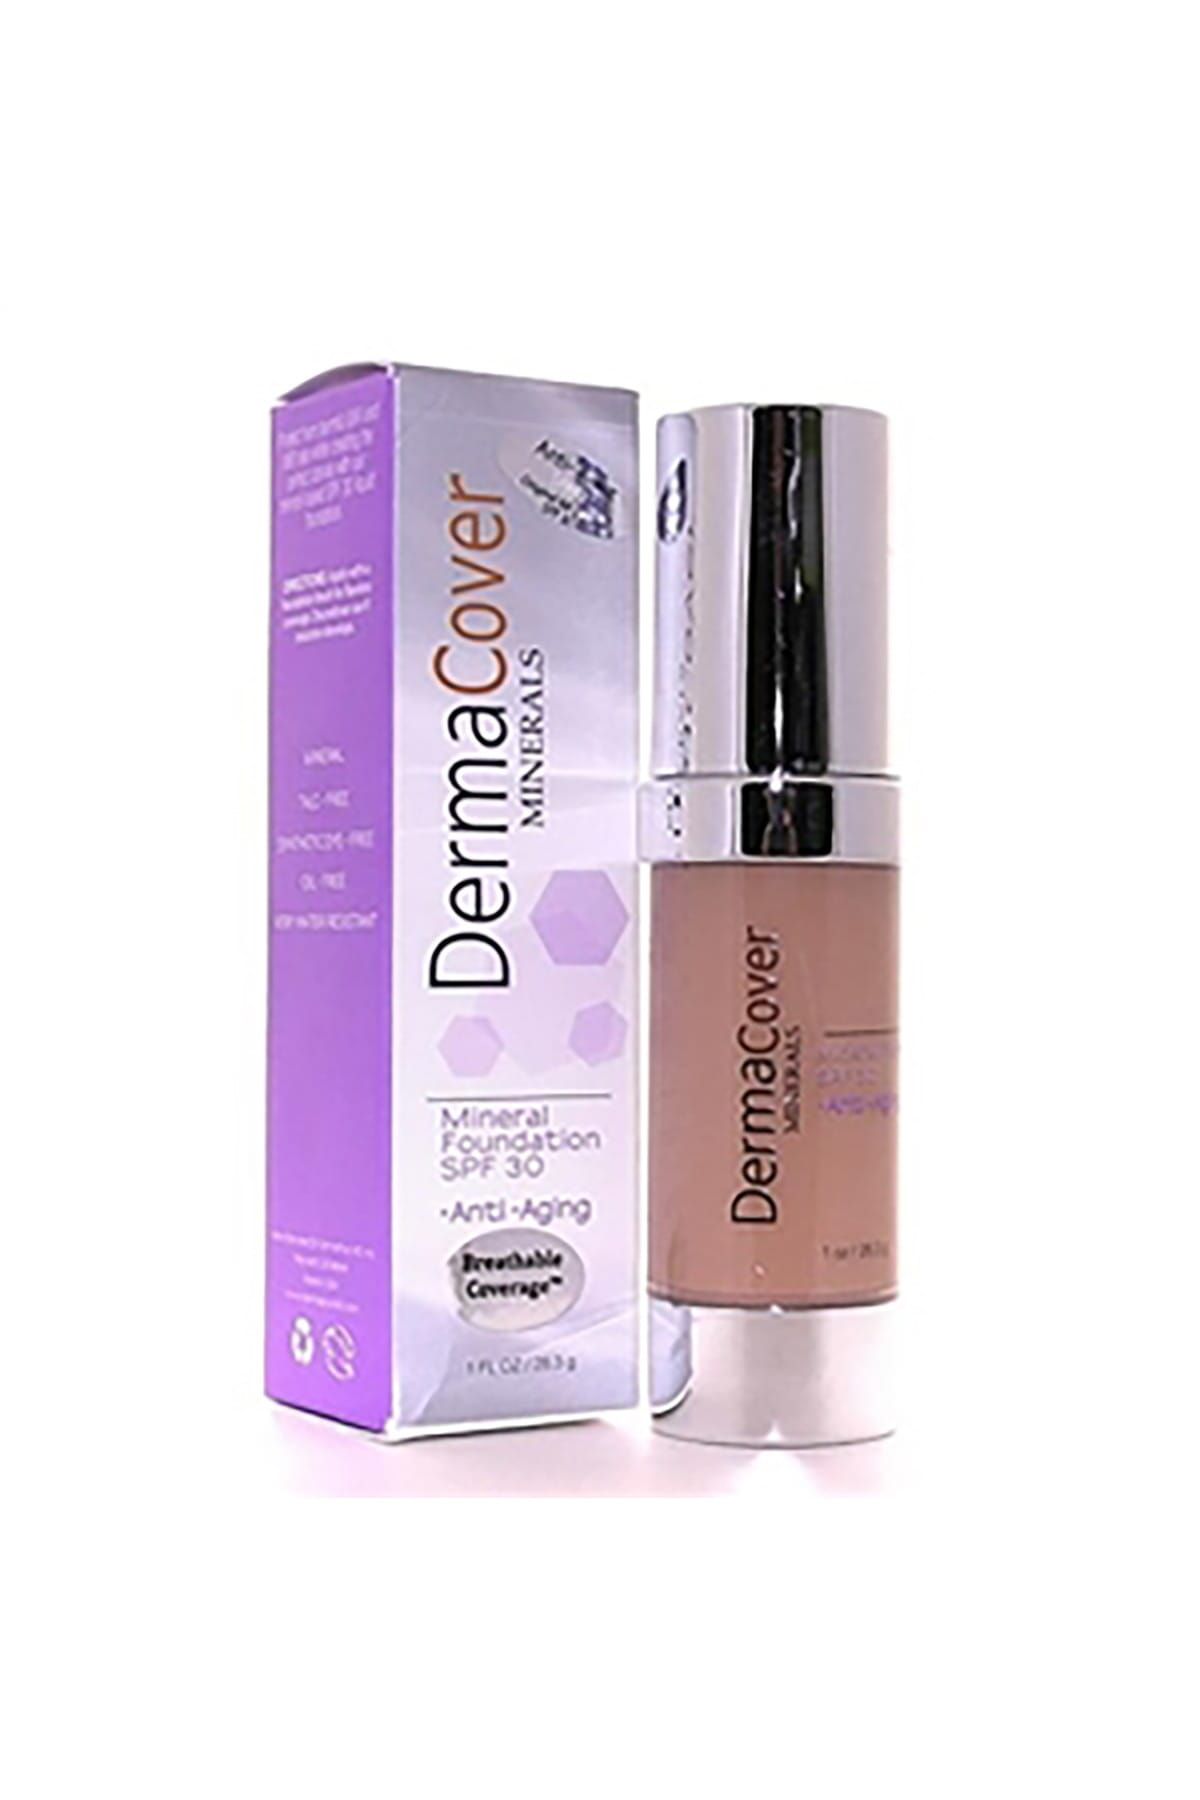 Dermaplus Md DermaCover Mineral SPF30 Anti-Aging 28.3g 839704001224